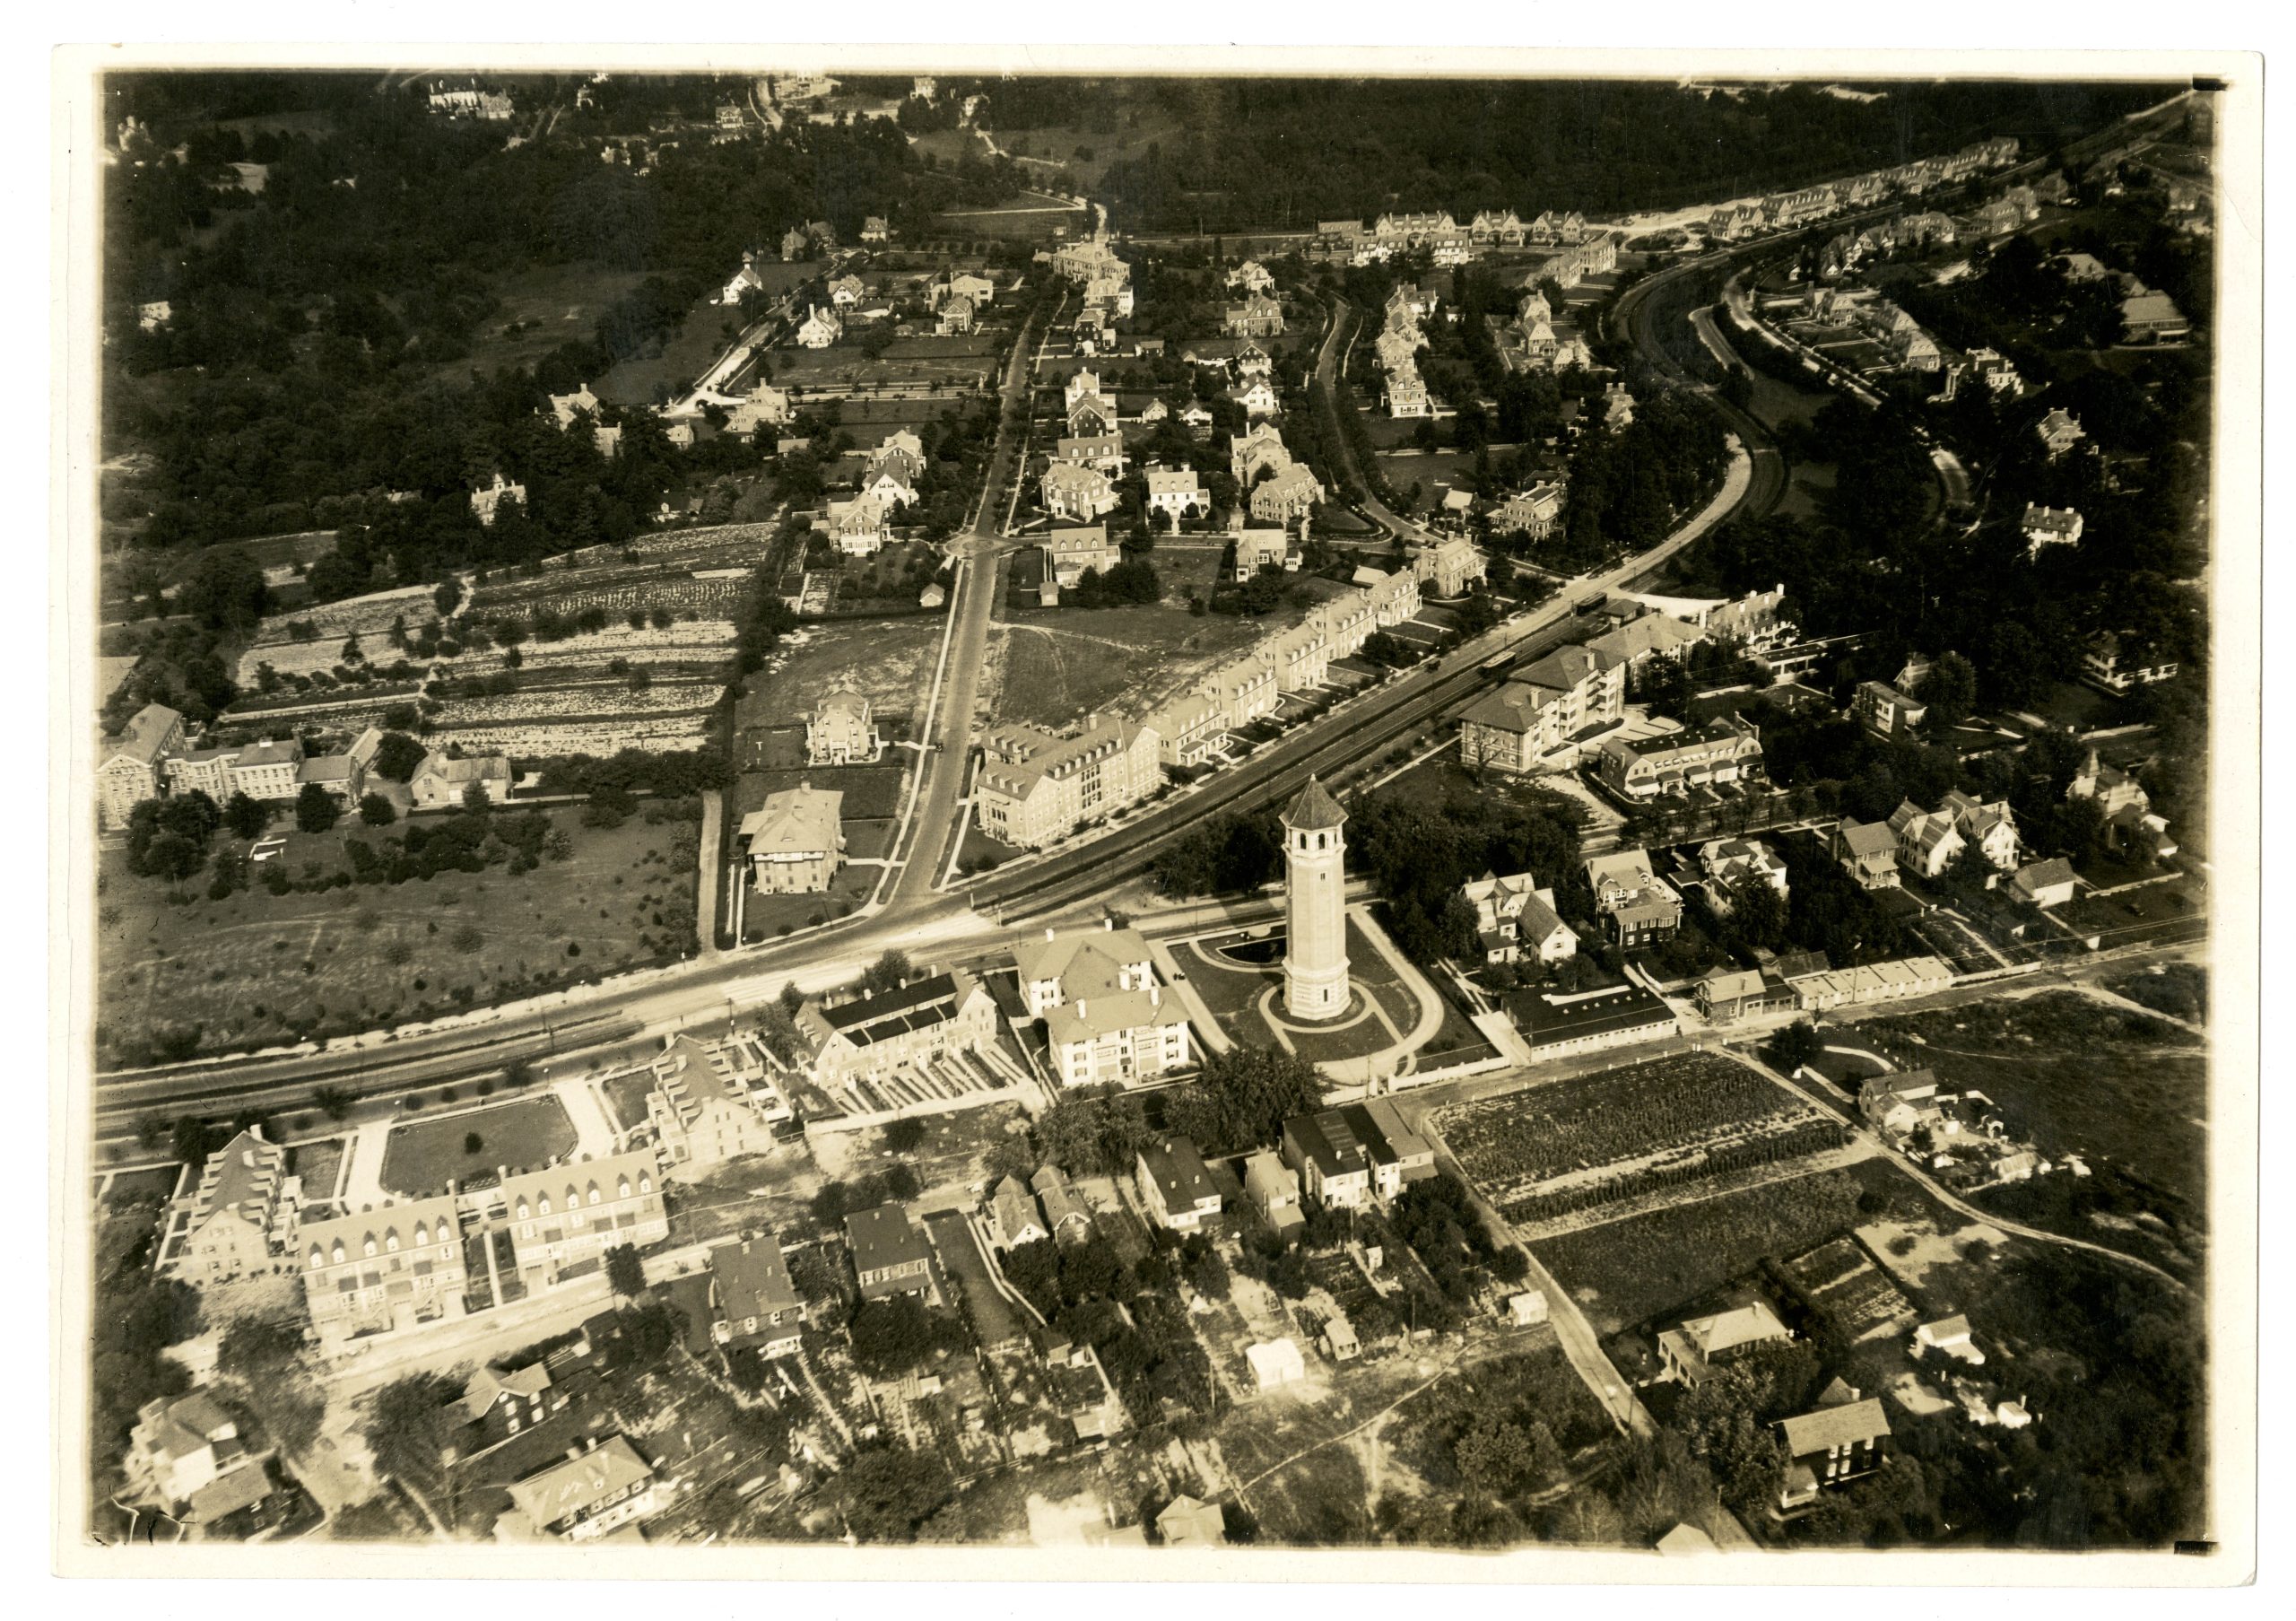 Aerial view of Hoes Heights and Roland Park circa 1925.